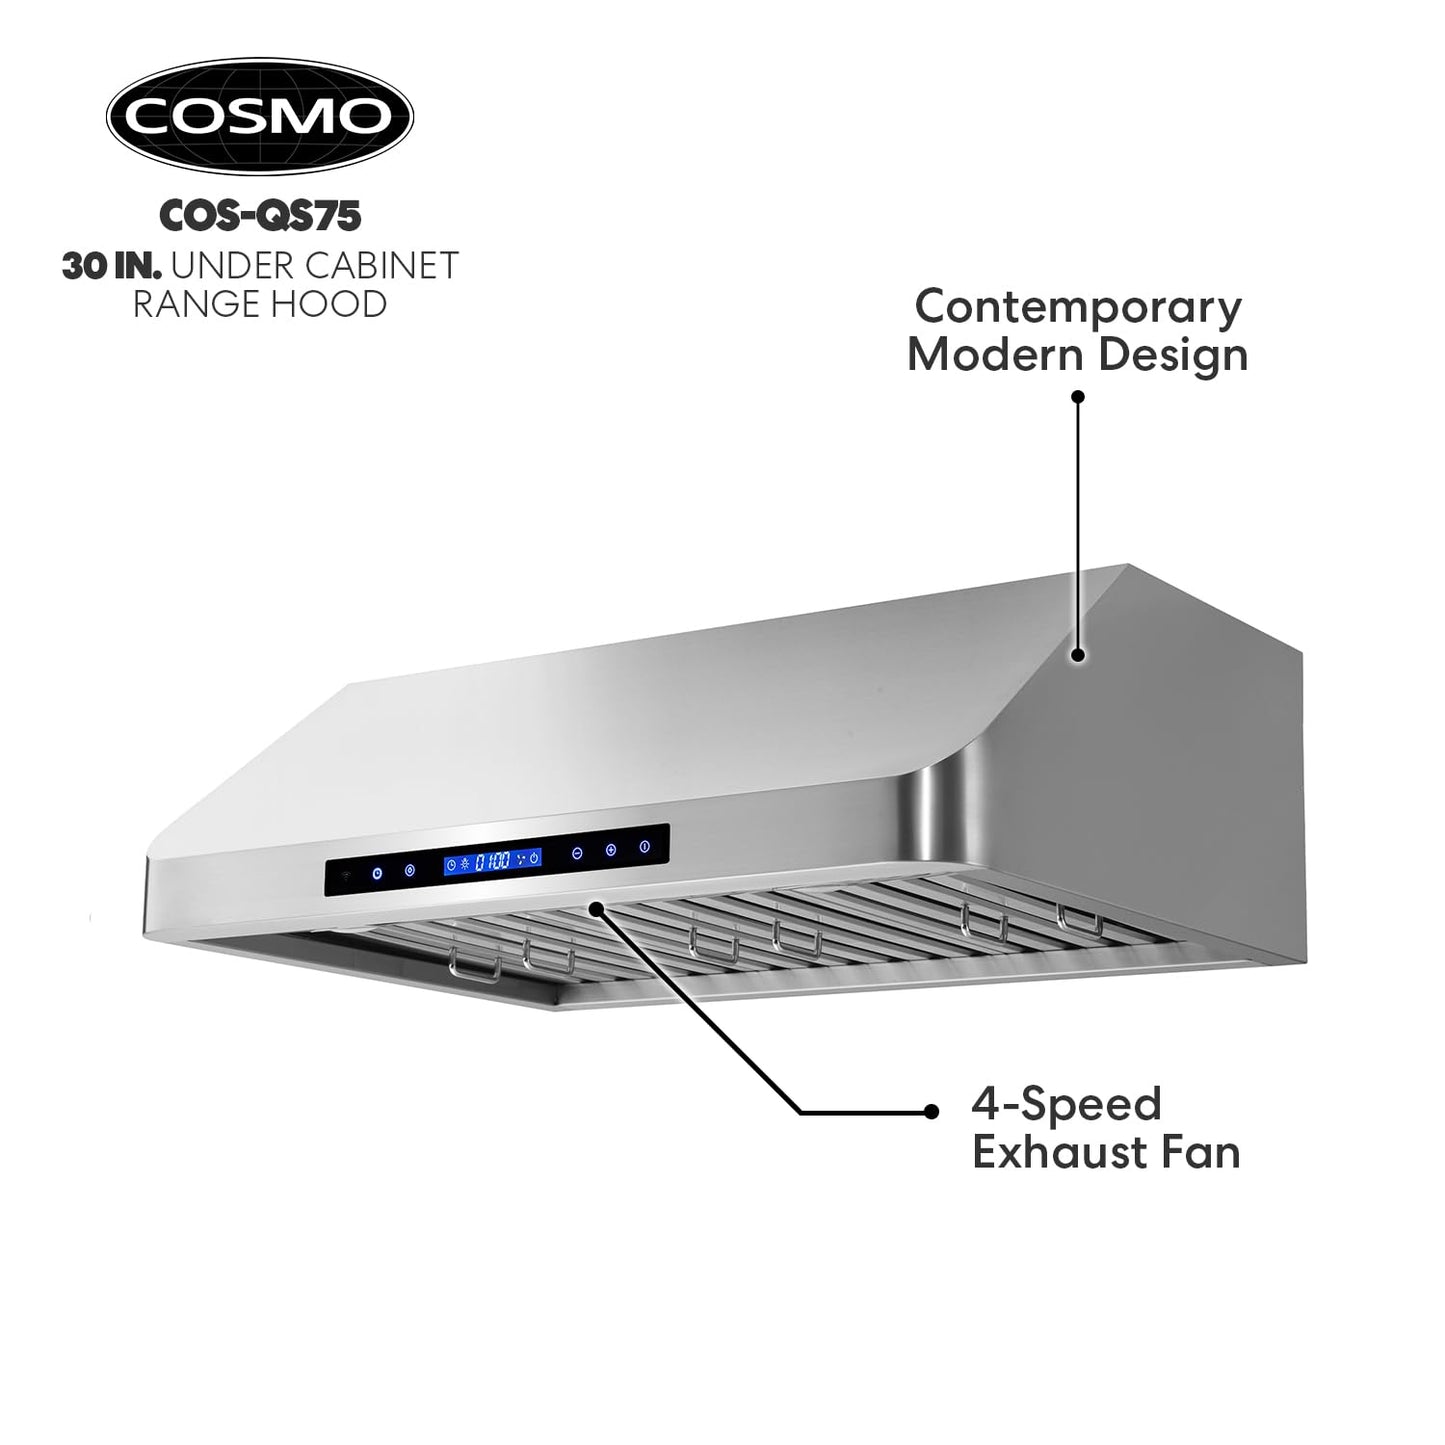 COSMO COS-QS75 30 in. Under Cabinet Range Hood with 500 CFM, Permanent Filters, LED Lights, Convertible from Ducted to Ductless (Kit Not Included) in Stainless Steel